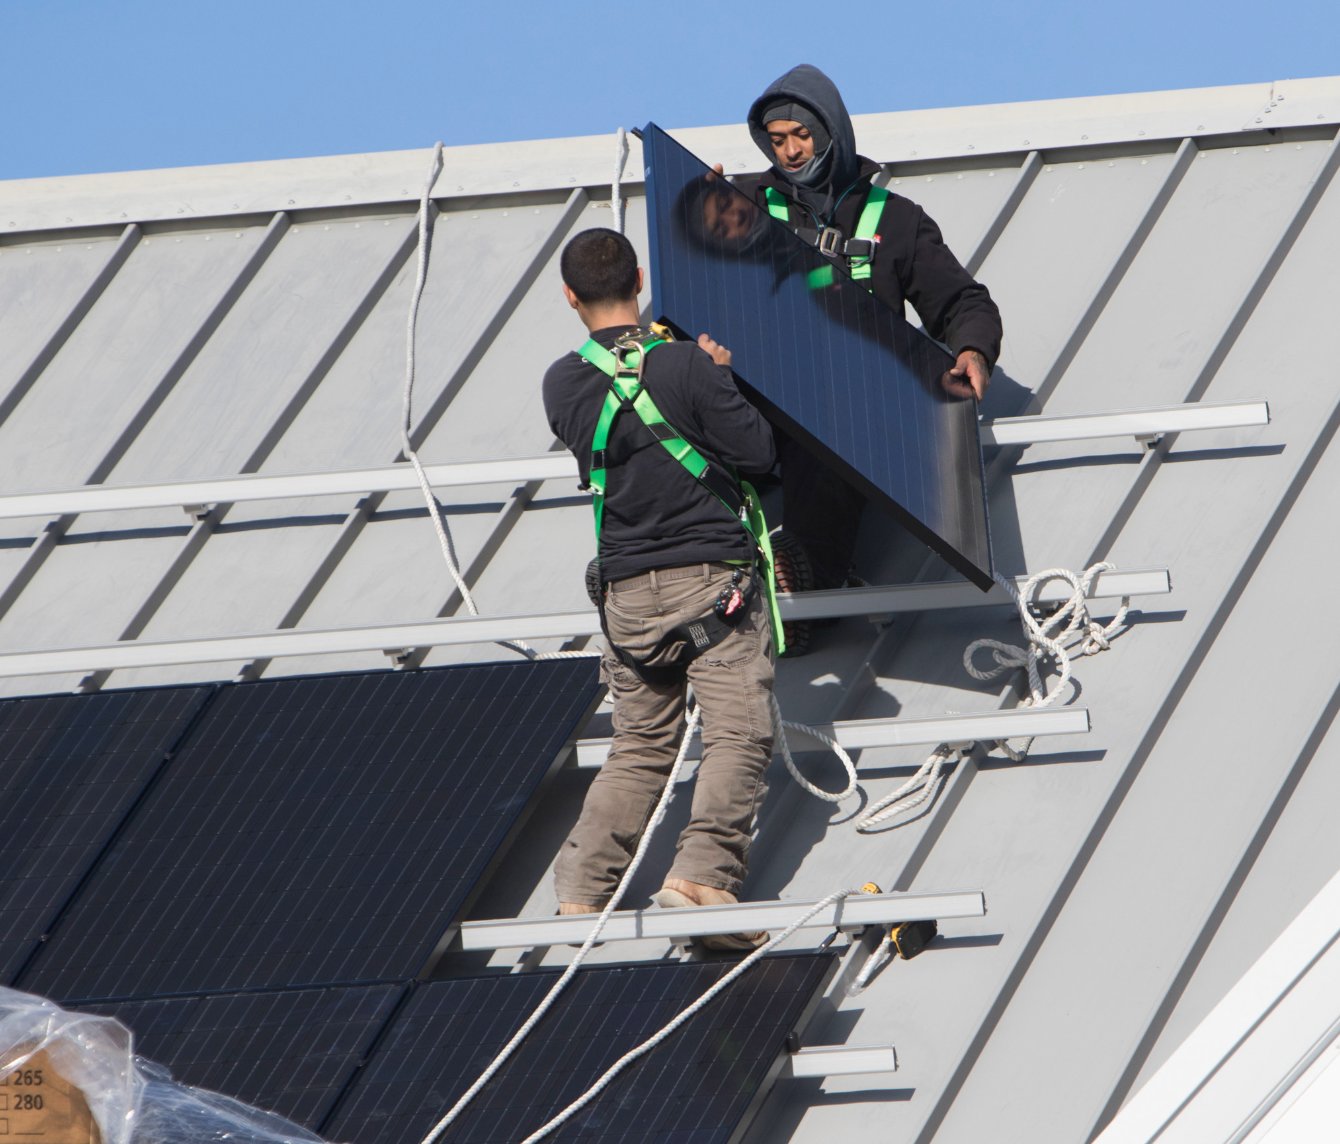 Workers install solar panels on the roof of the Nantucket Ice rink off Backus Lane, one of the largest solar arrays on the island, several years ago.